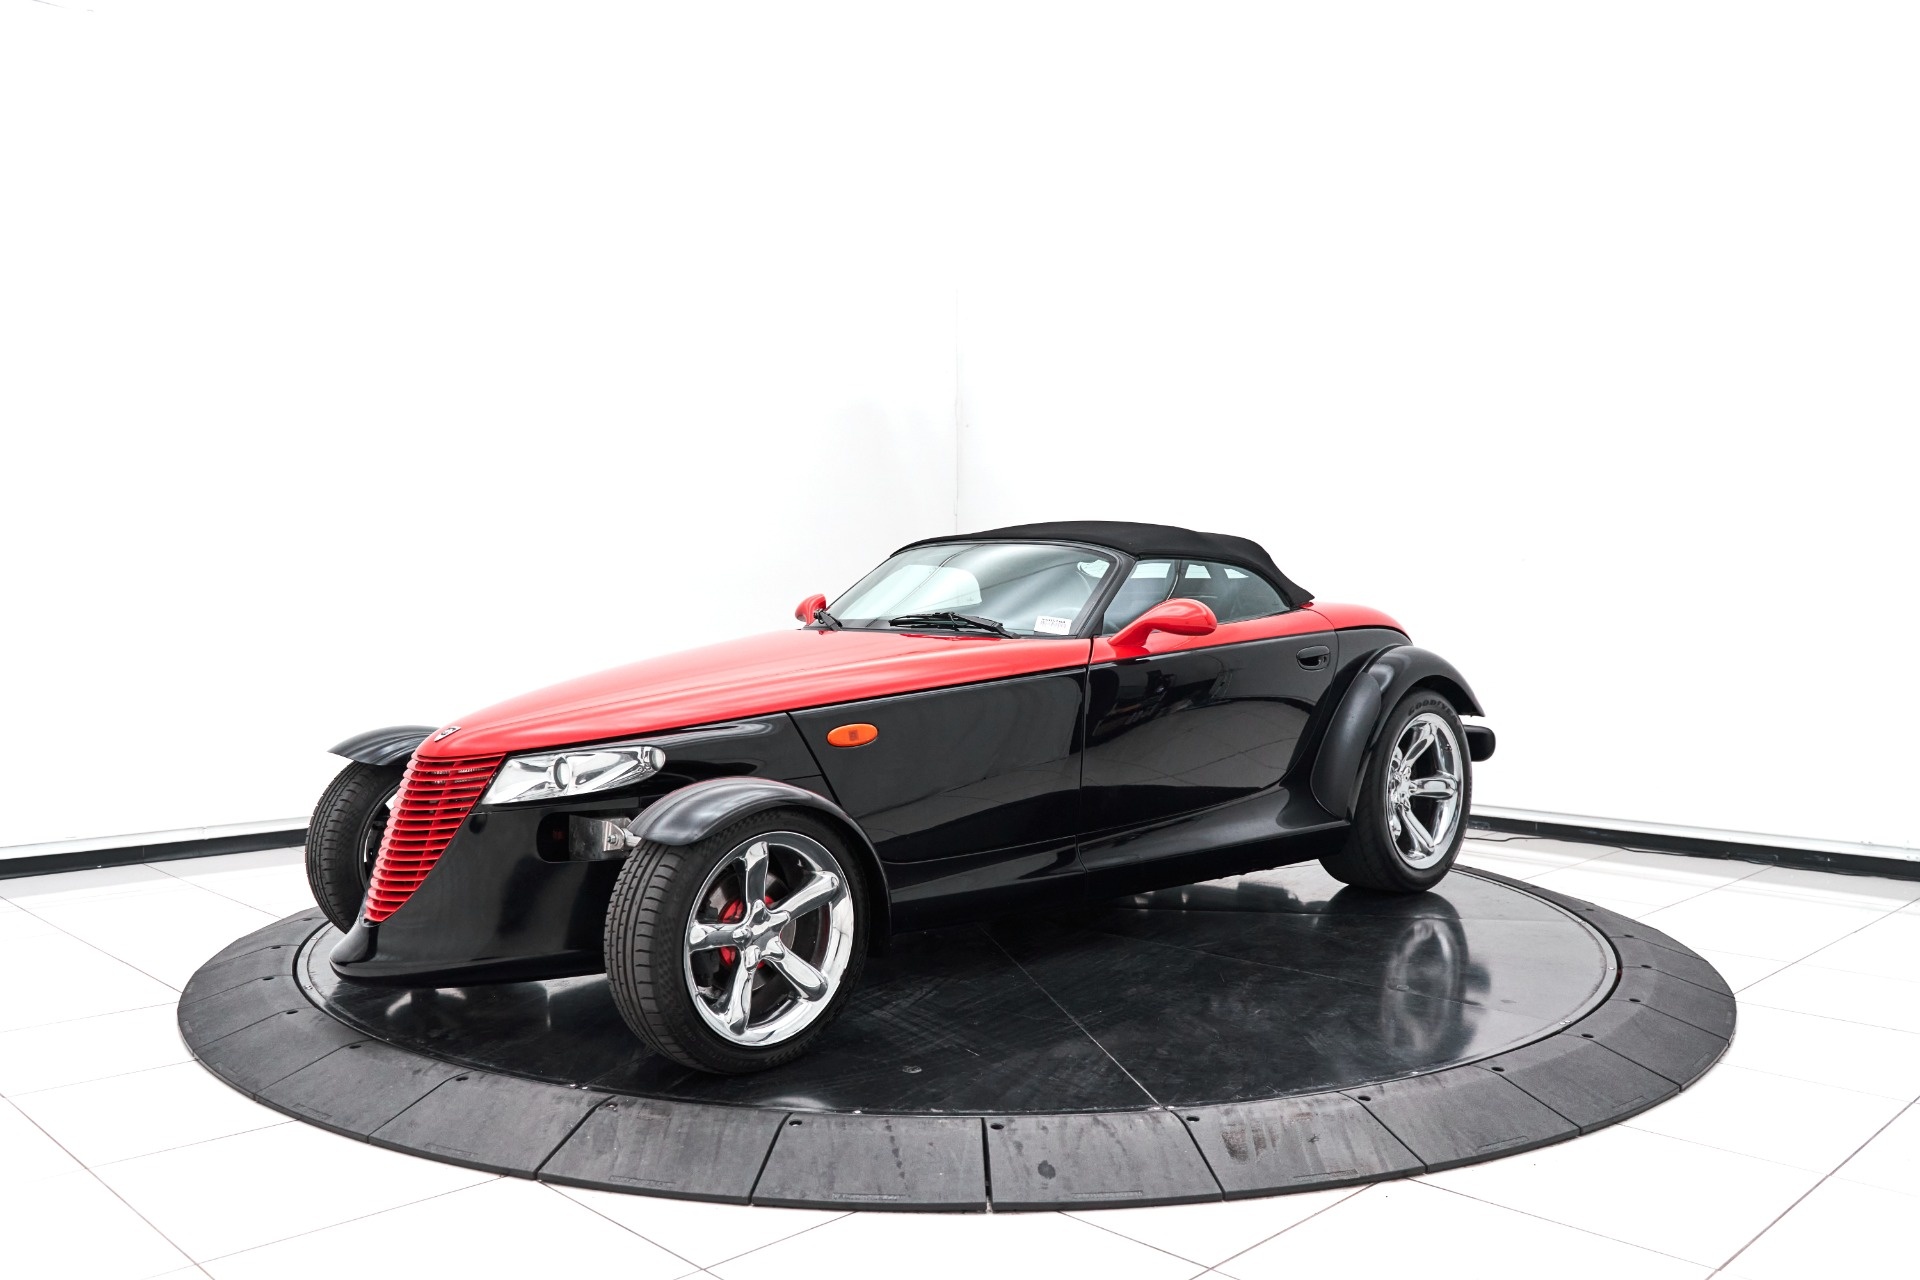 Plymouth Prowler, Classic car, Rare find, Iconic American vehicle, 1920x1280 HD Desktop